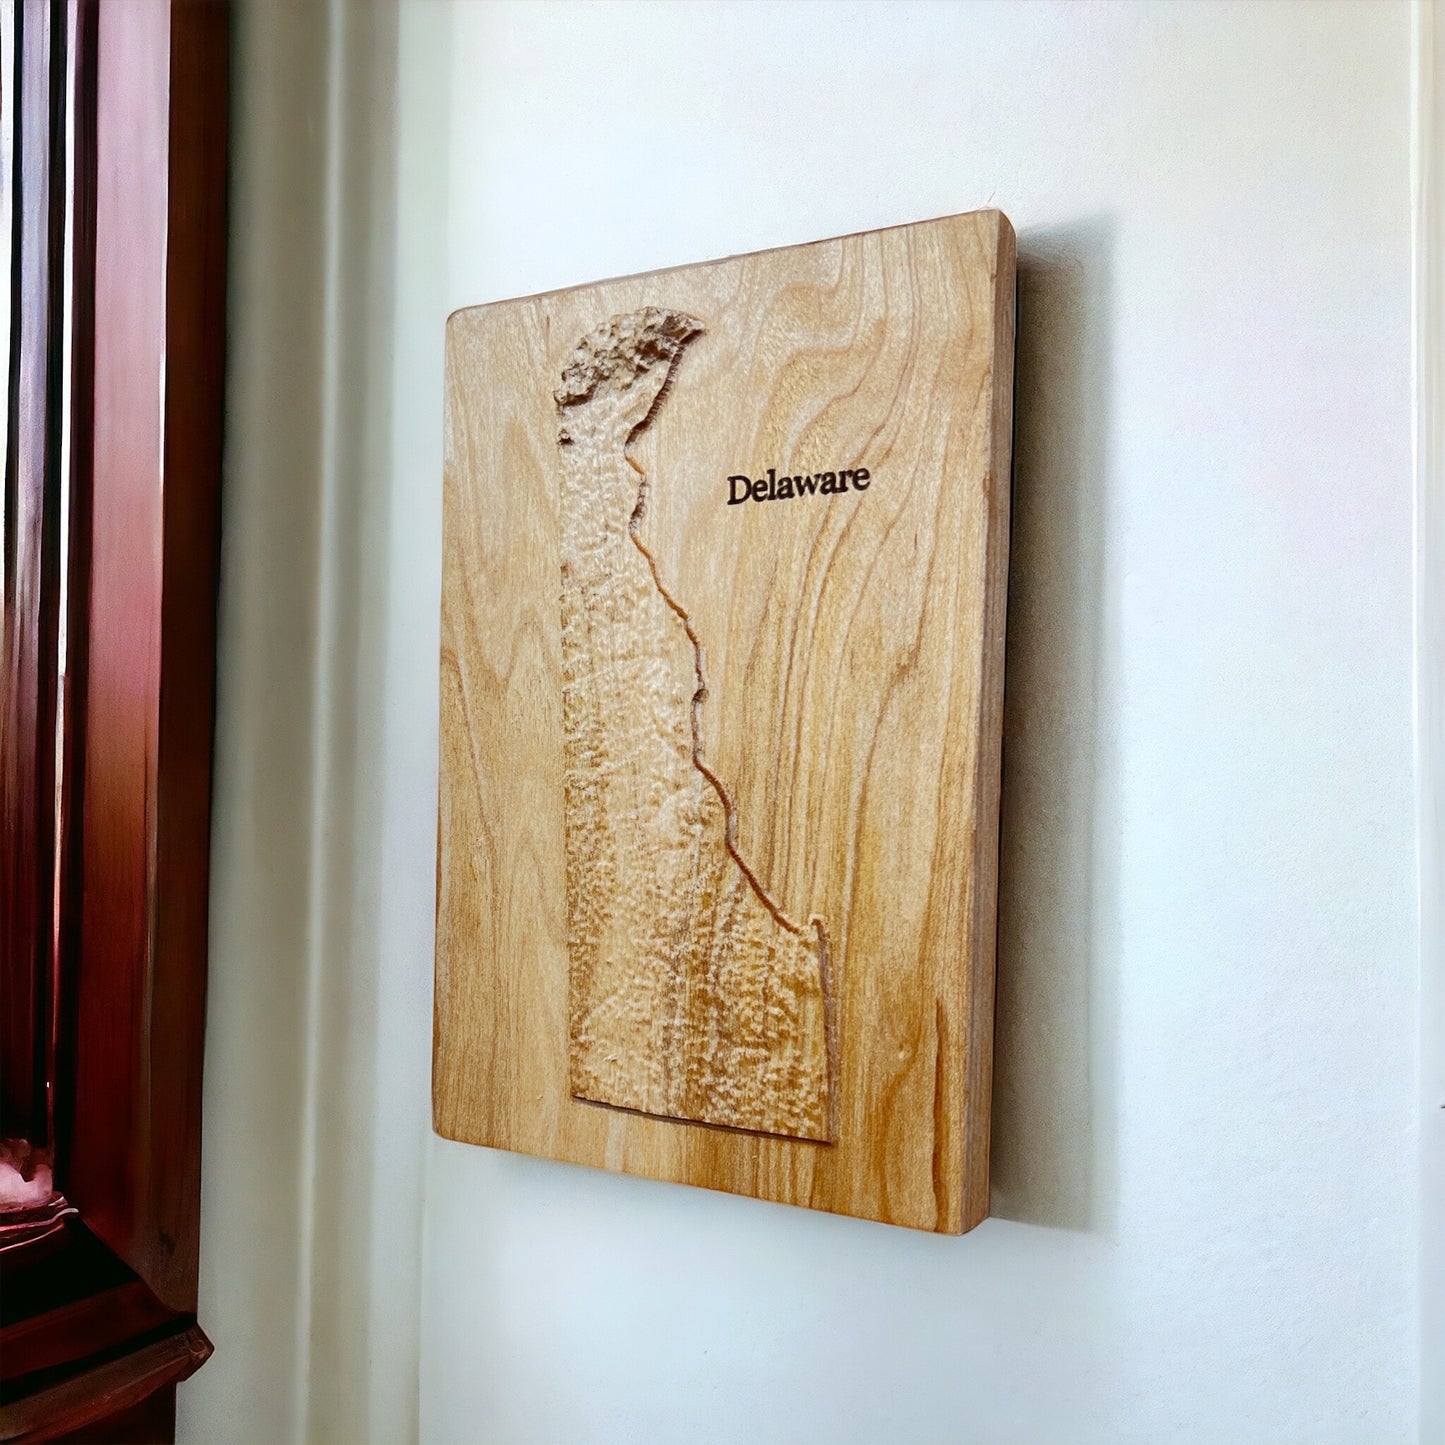 Delaware Map | Wood Carved Relief Map | 3D Topographic Wooden Map | Unique Wedding Anniversary Birthday Housewarming | Delaware Gift